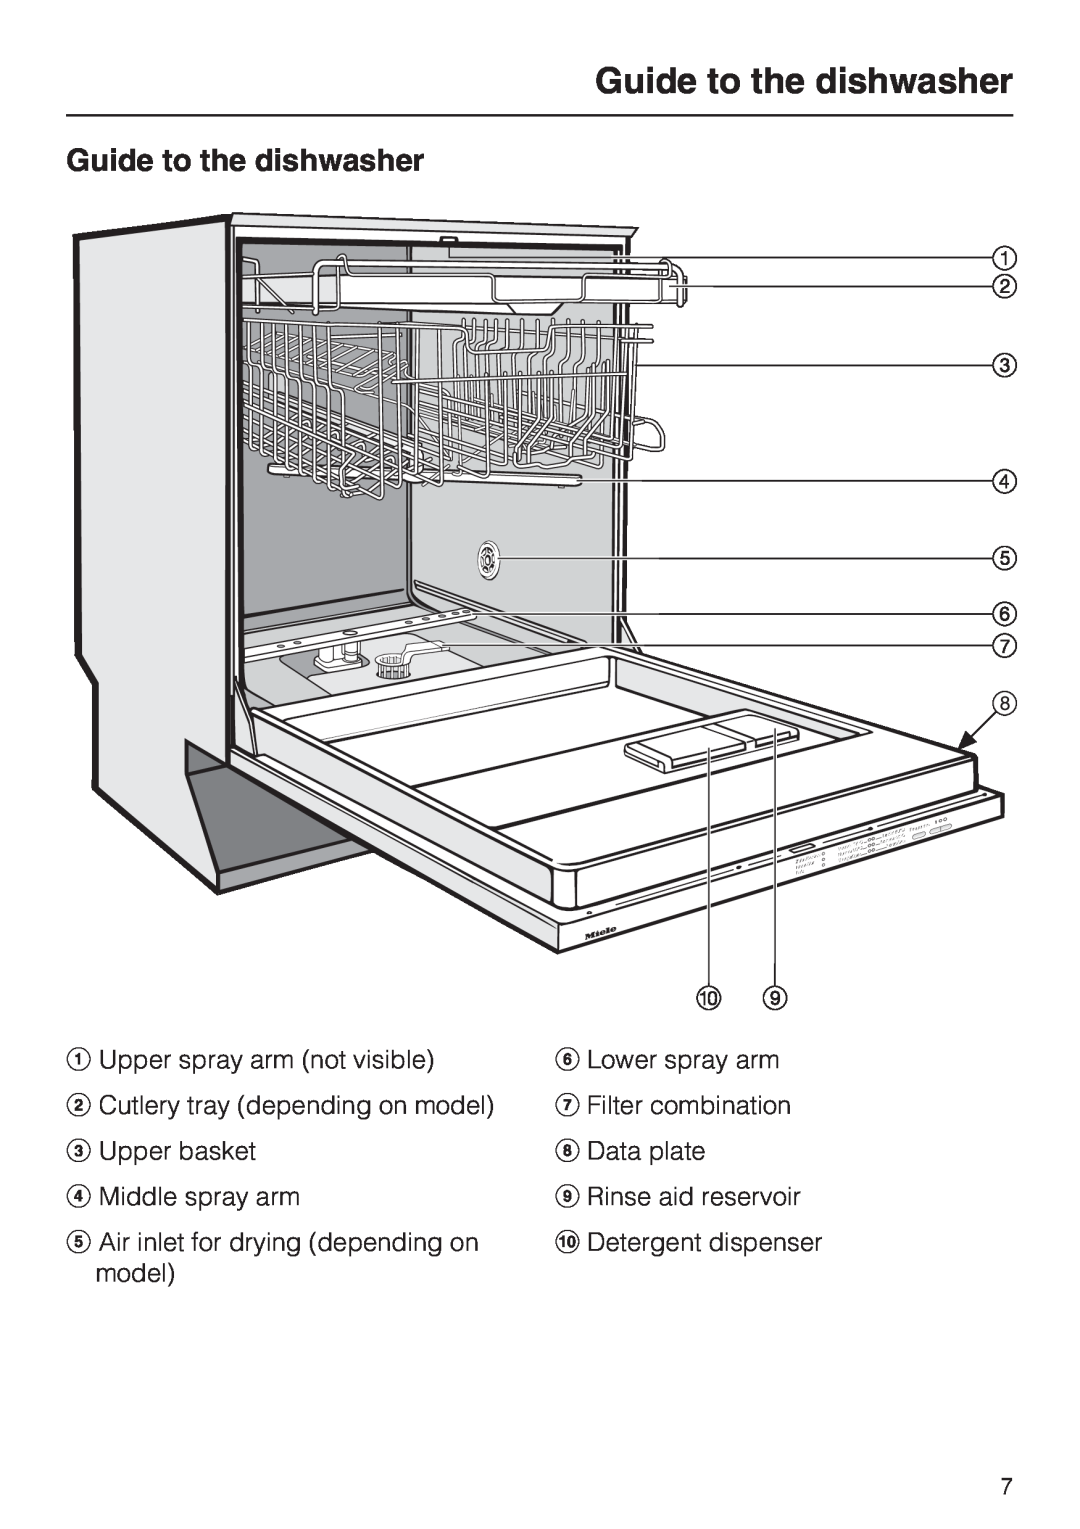 Miele G 2180, G 2170, G 1180 manual Guide to the dishwasher 